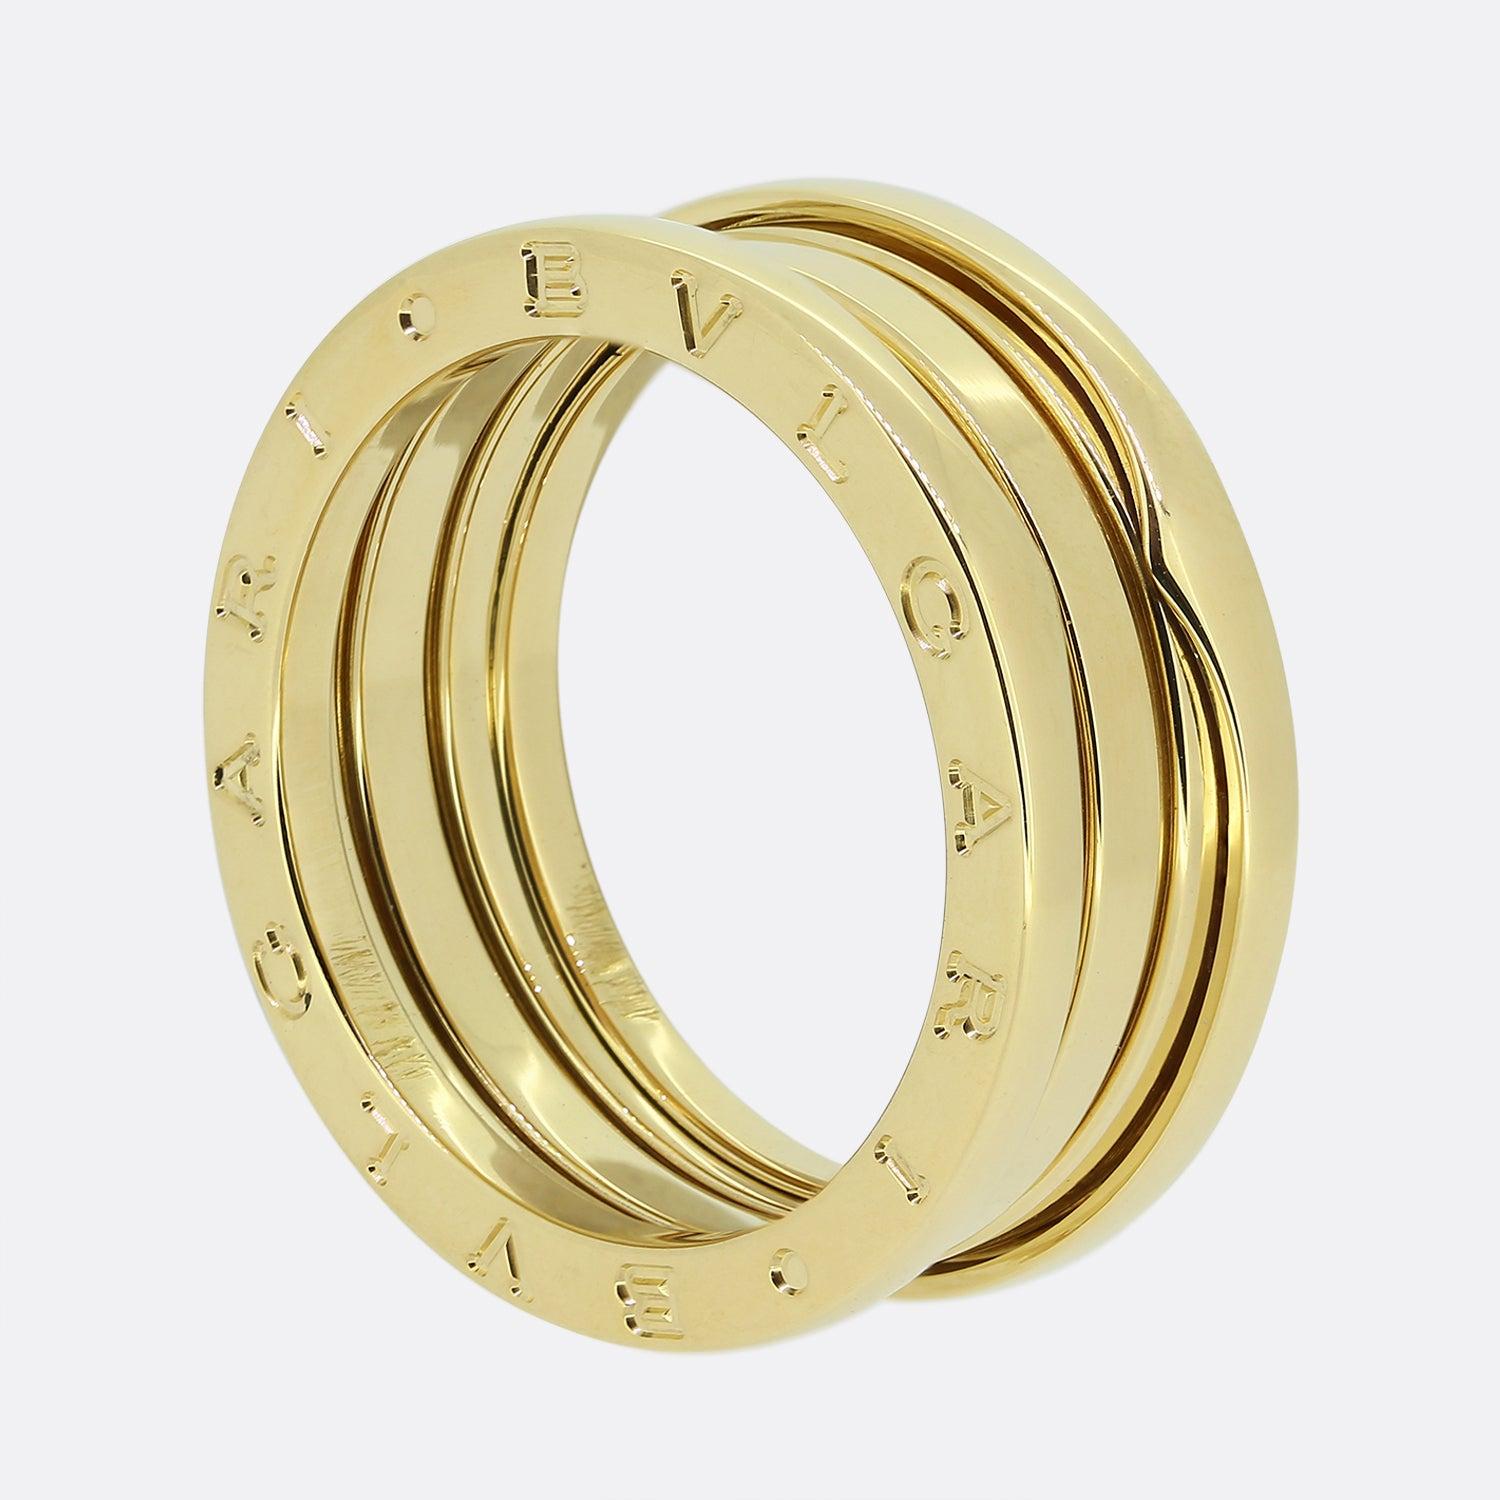 Here we have an excellently crafted B.Zero1 ring from the world renowned Italian jewellery house of Bvlagri. This is the 18ct yellow gold three-band model. 

The B.zero1 collection is inspired by the Roman colosseum, the most eternal of all